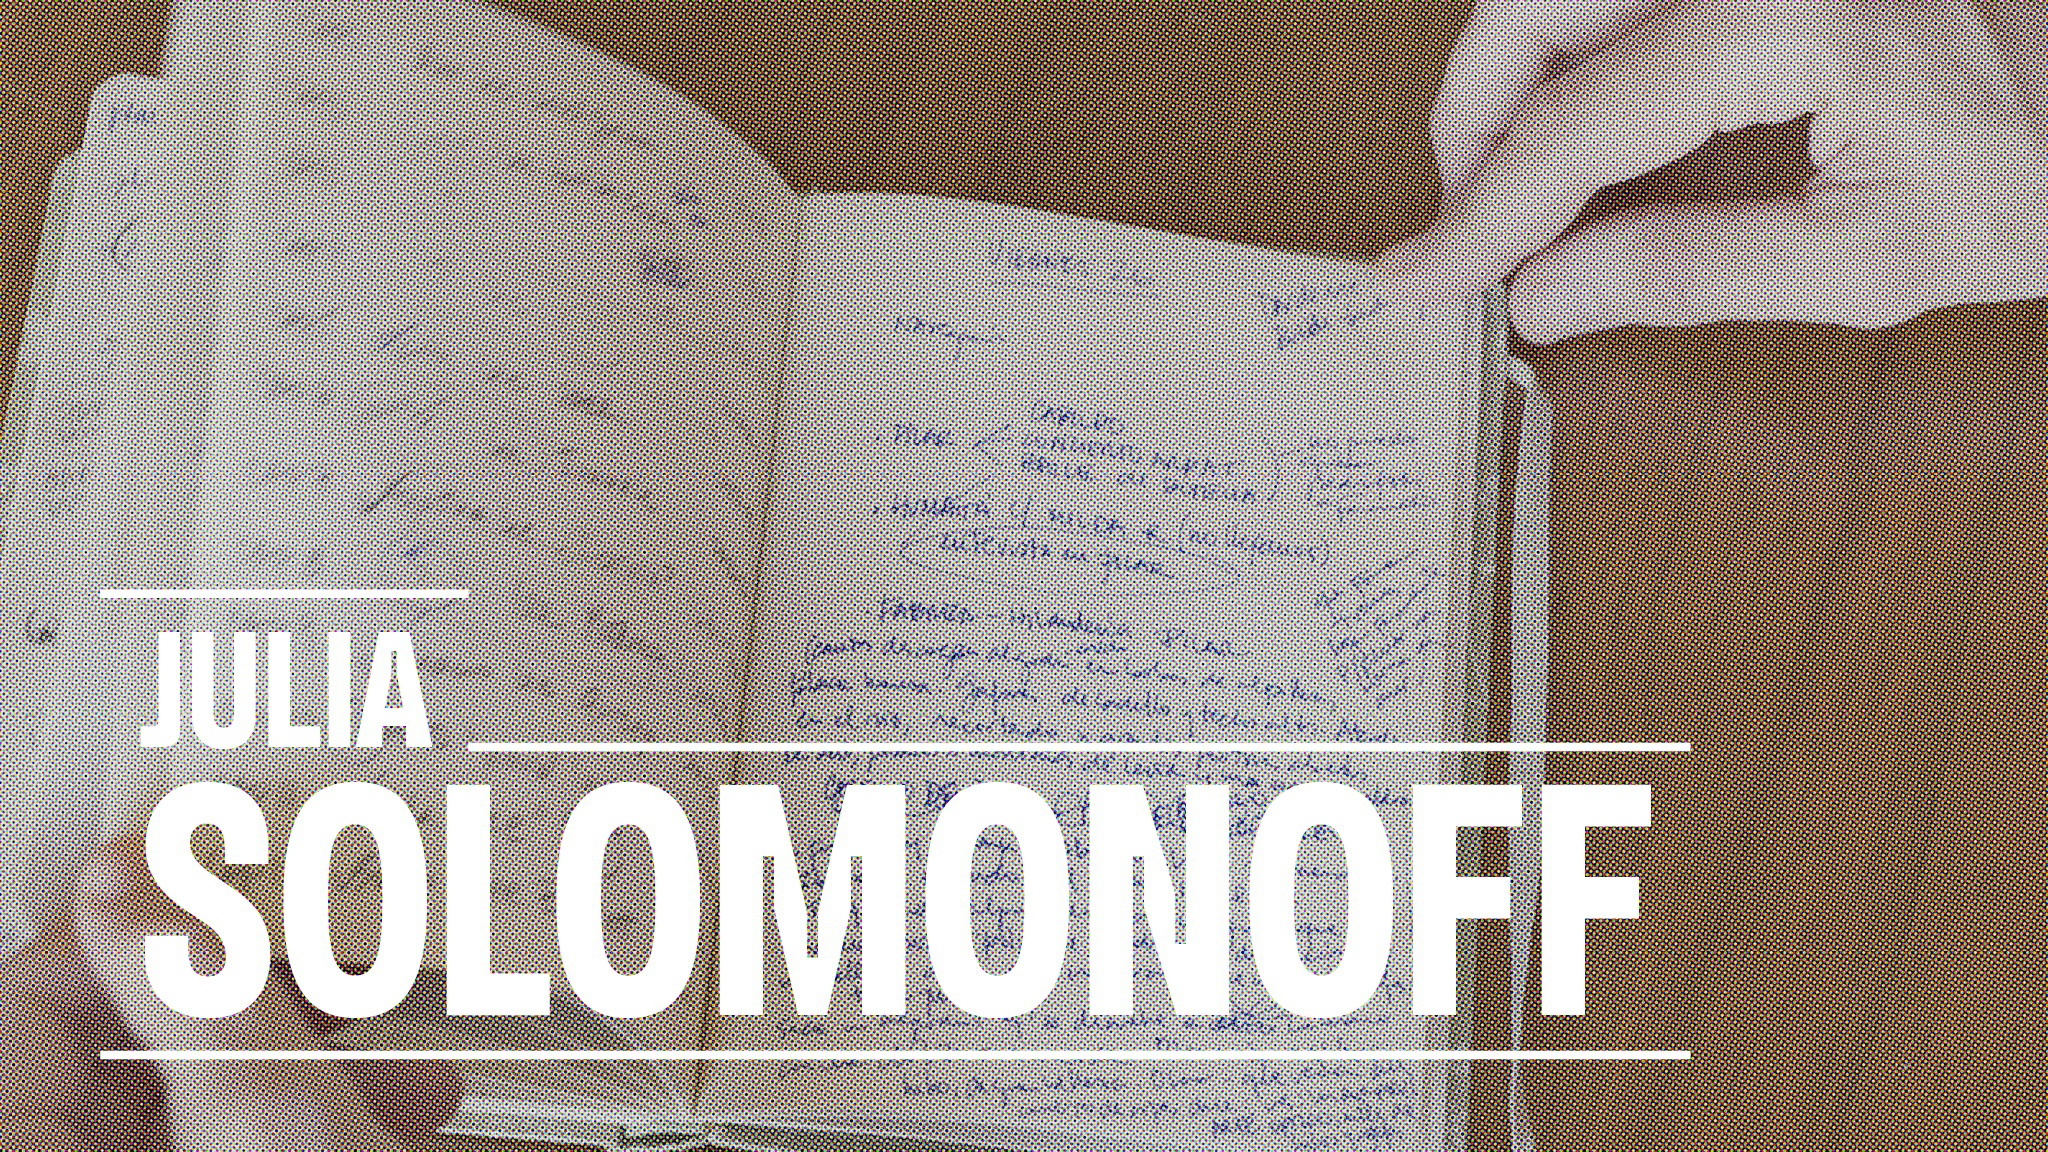 The name Julia Solomonoff in white type over an image of a notebook with writing in it held open by three fingers in its top right corner